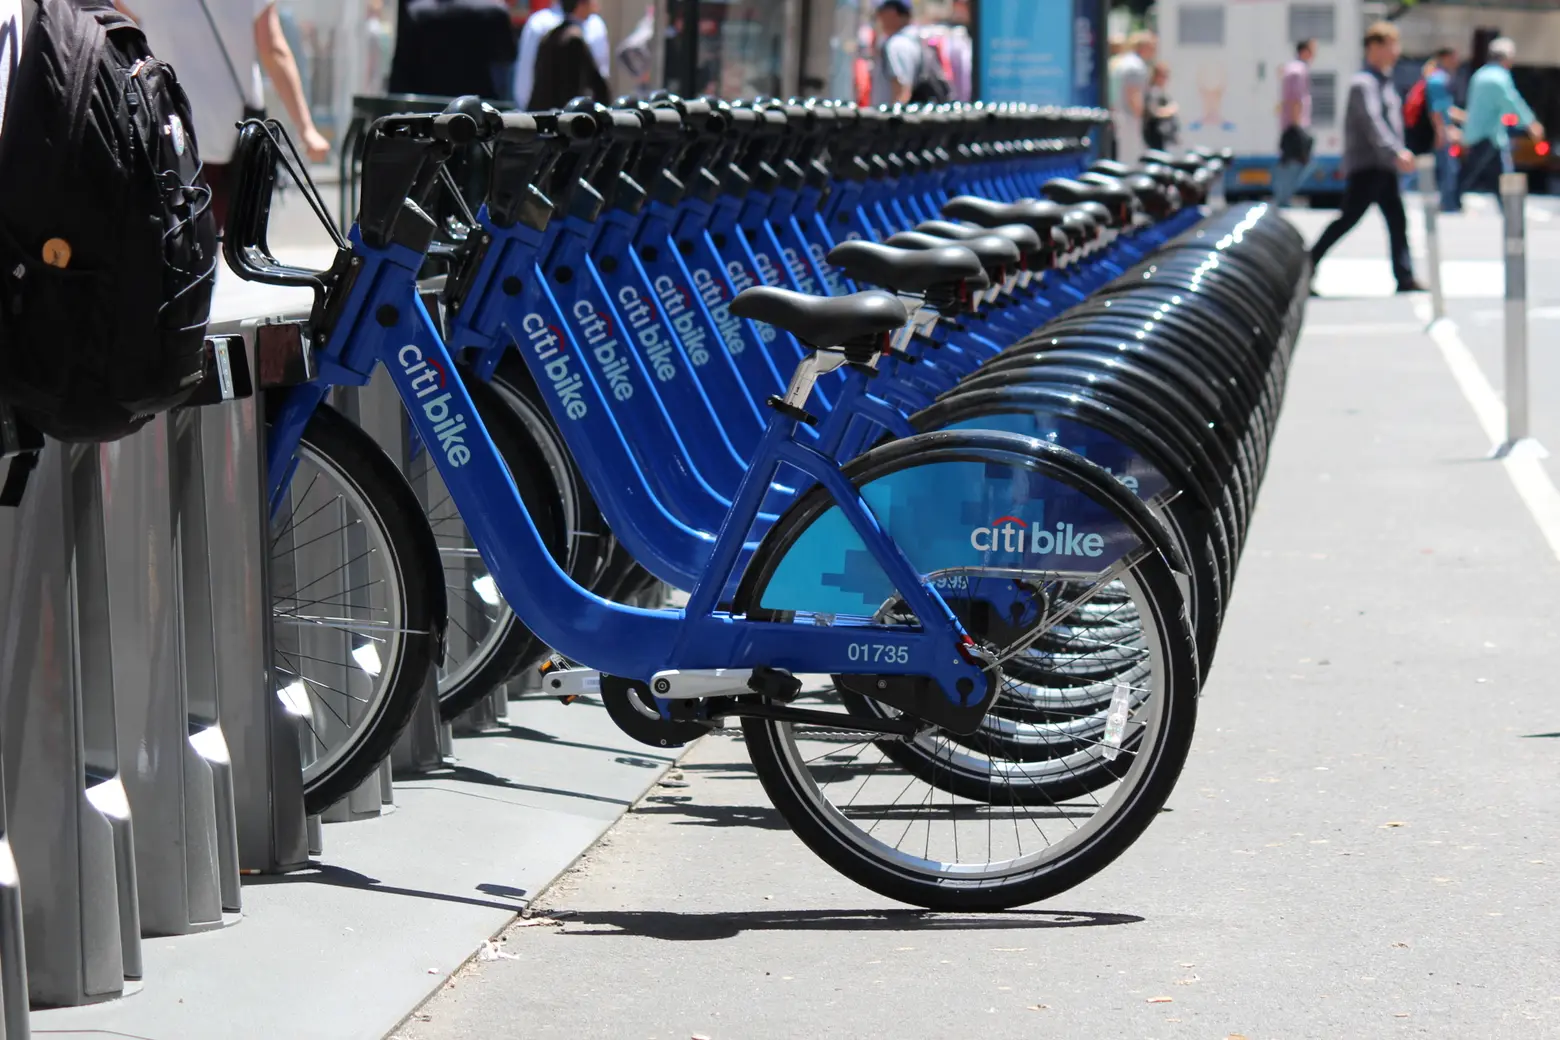 Citi Bike prices are increasing this month